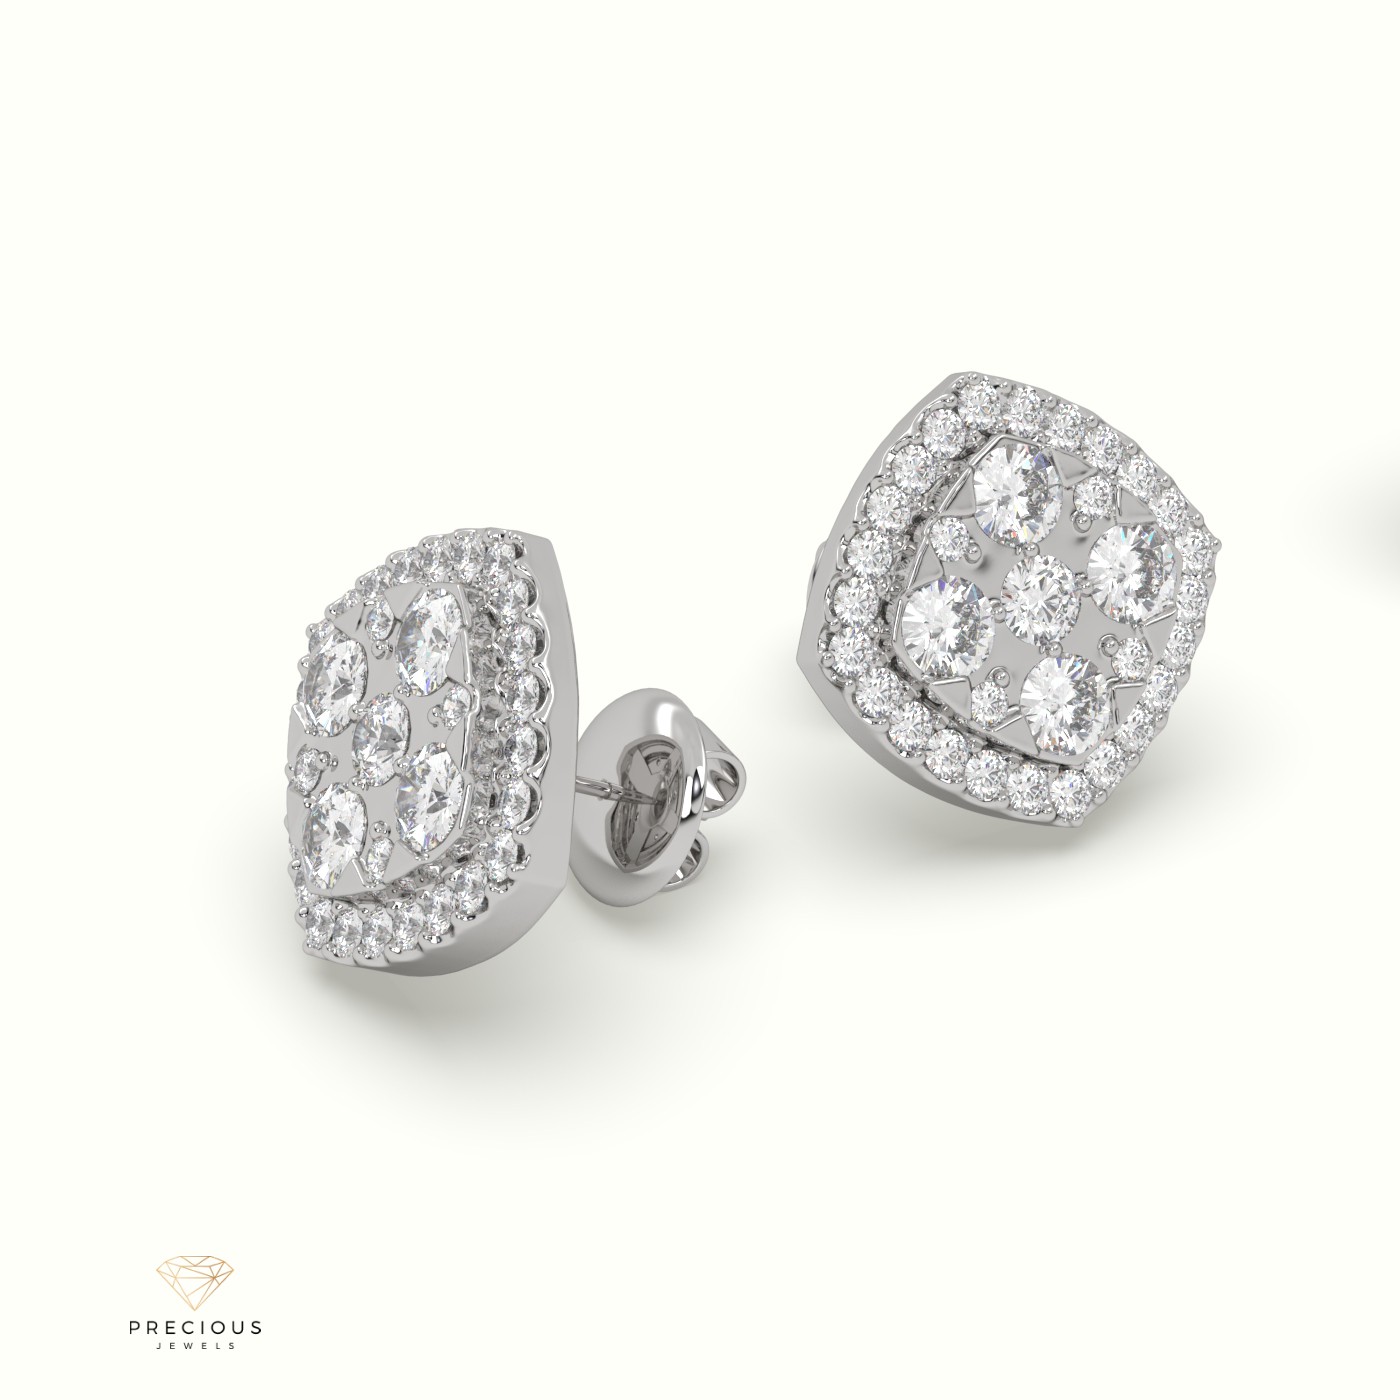 18k white gold rounded square diamond cluster earrings Photos & images